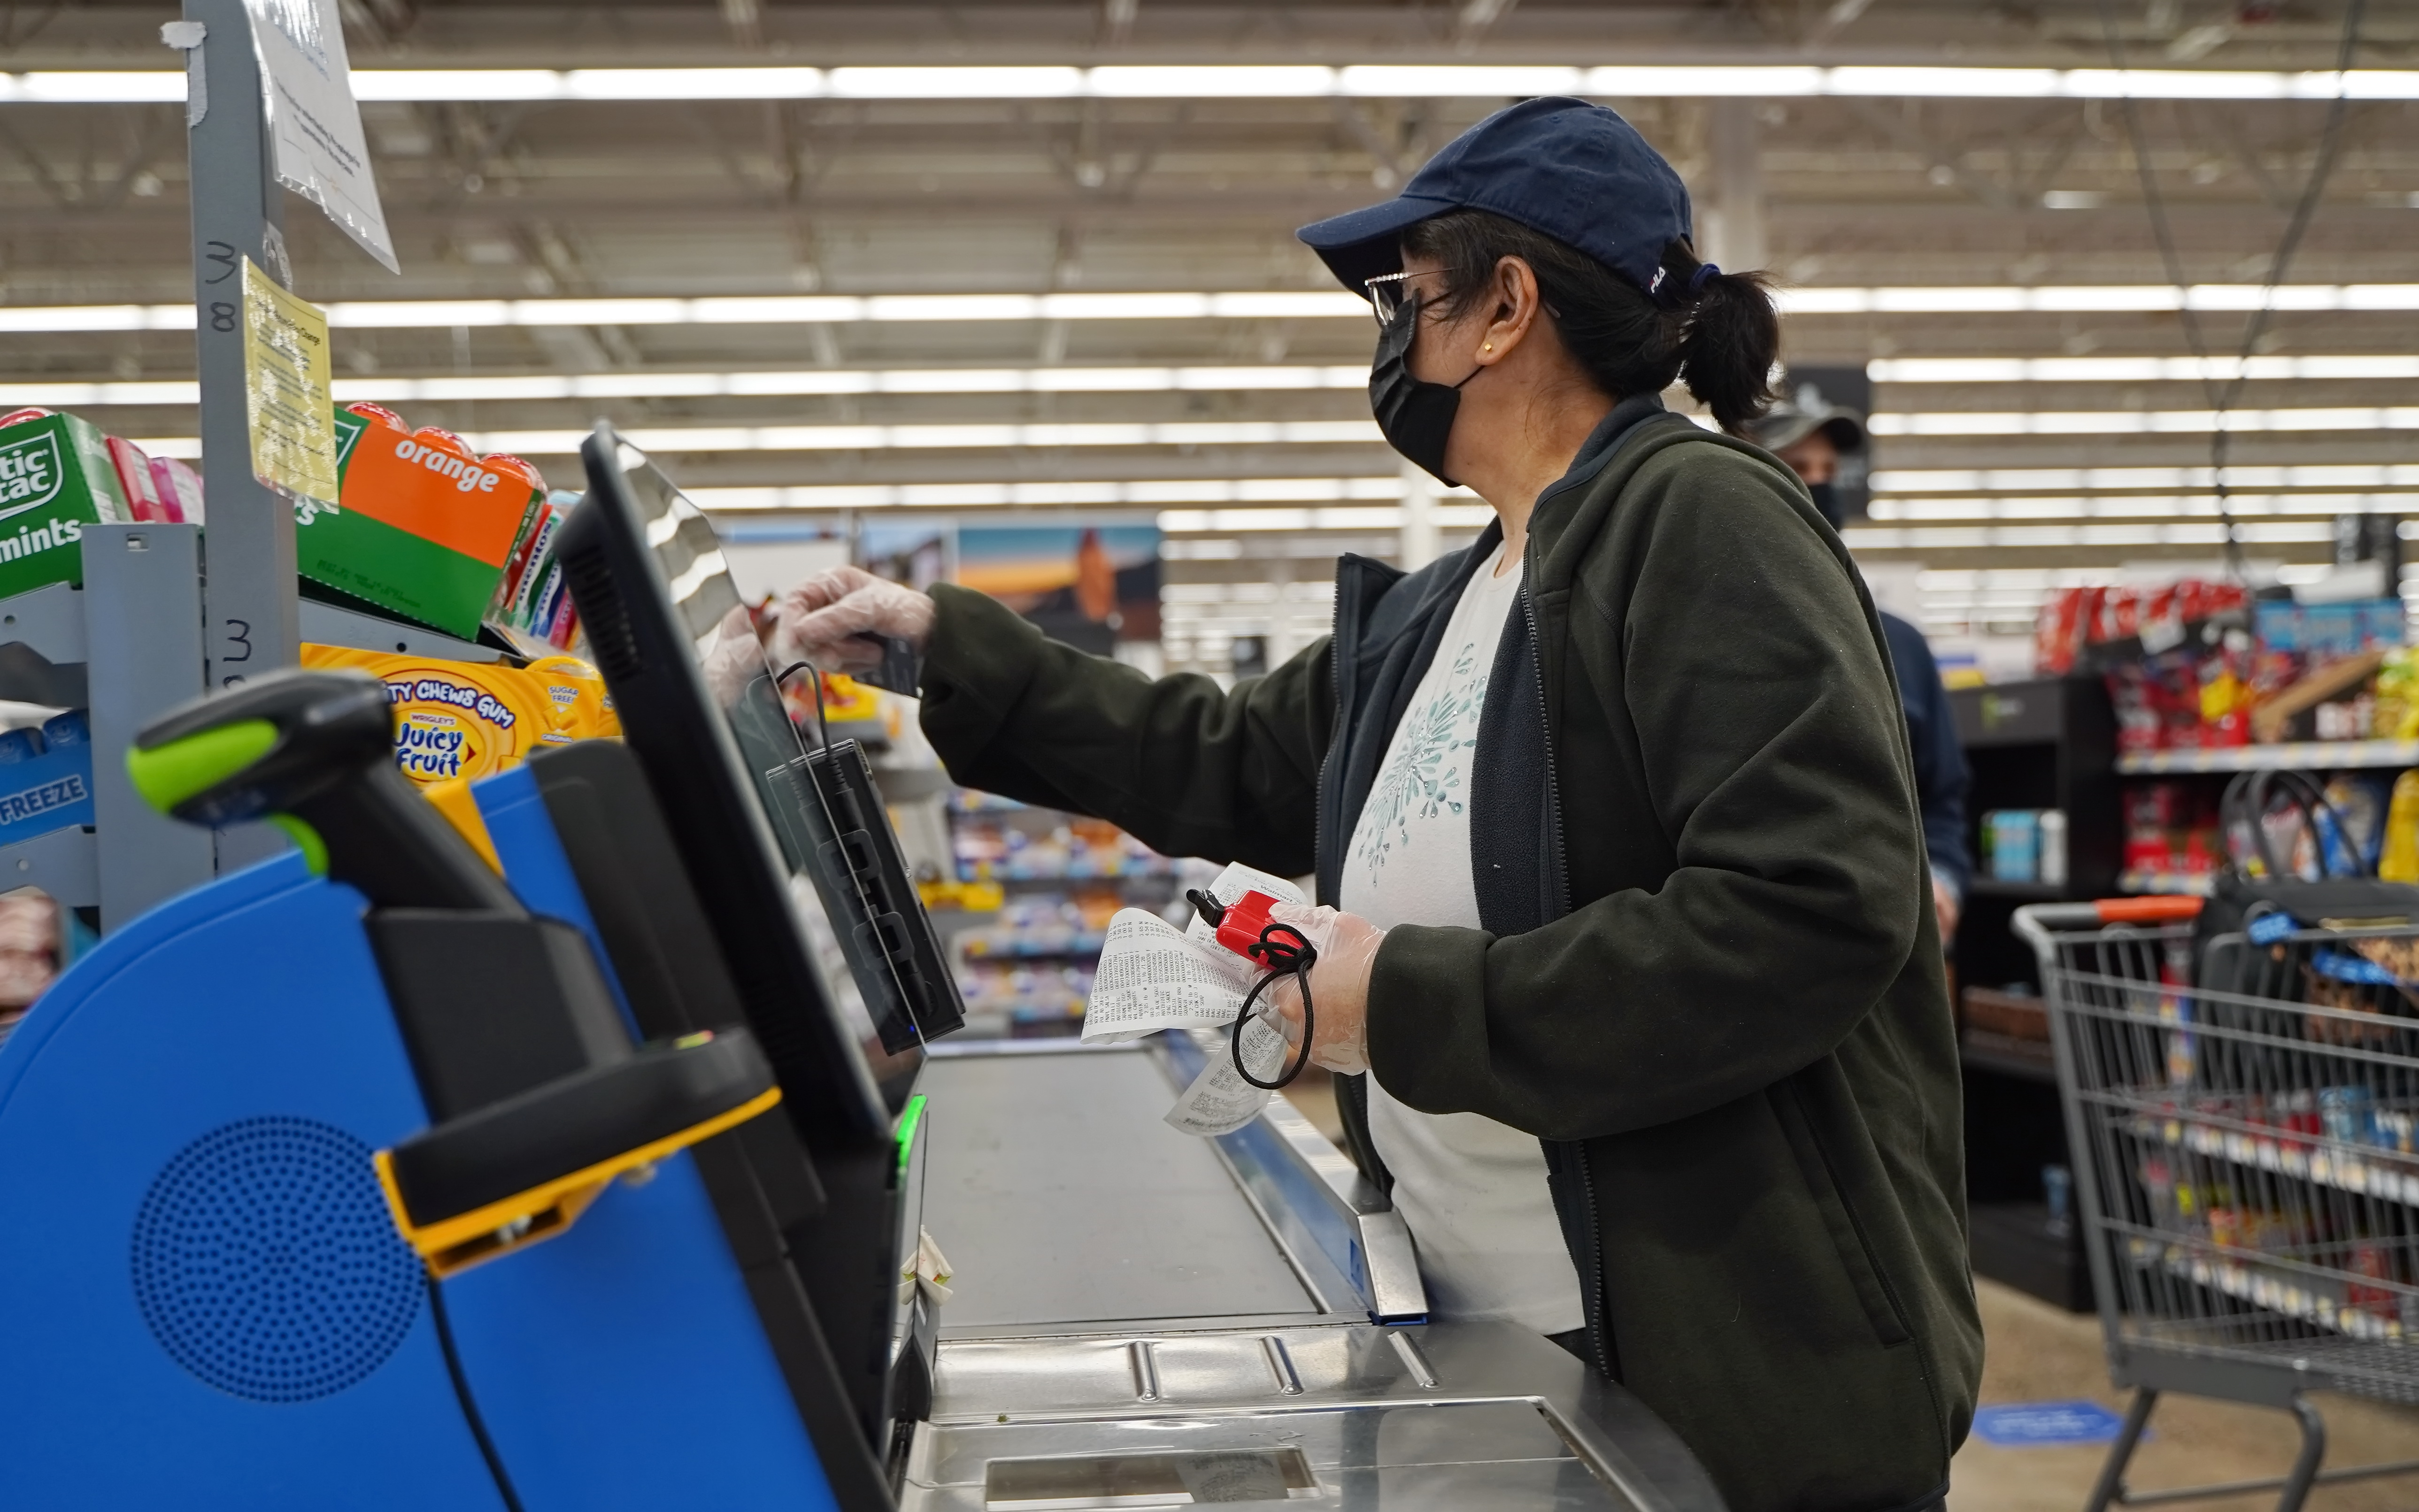 A woman at a self-checkout station | Source: Shutterstock